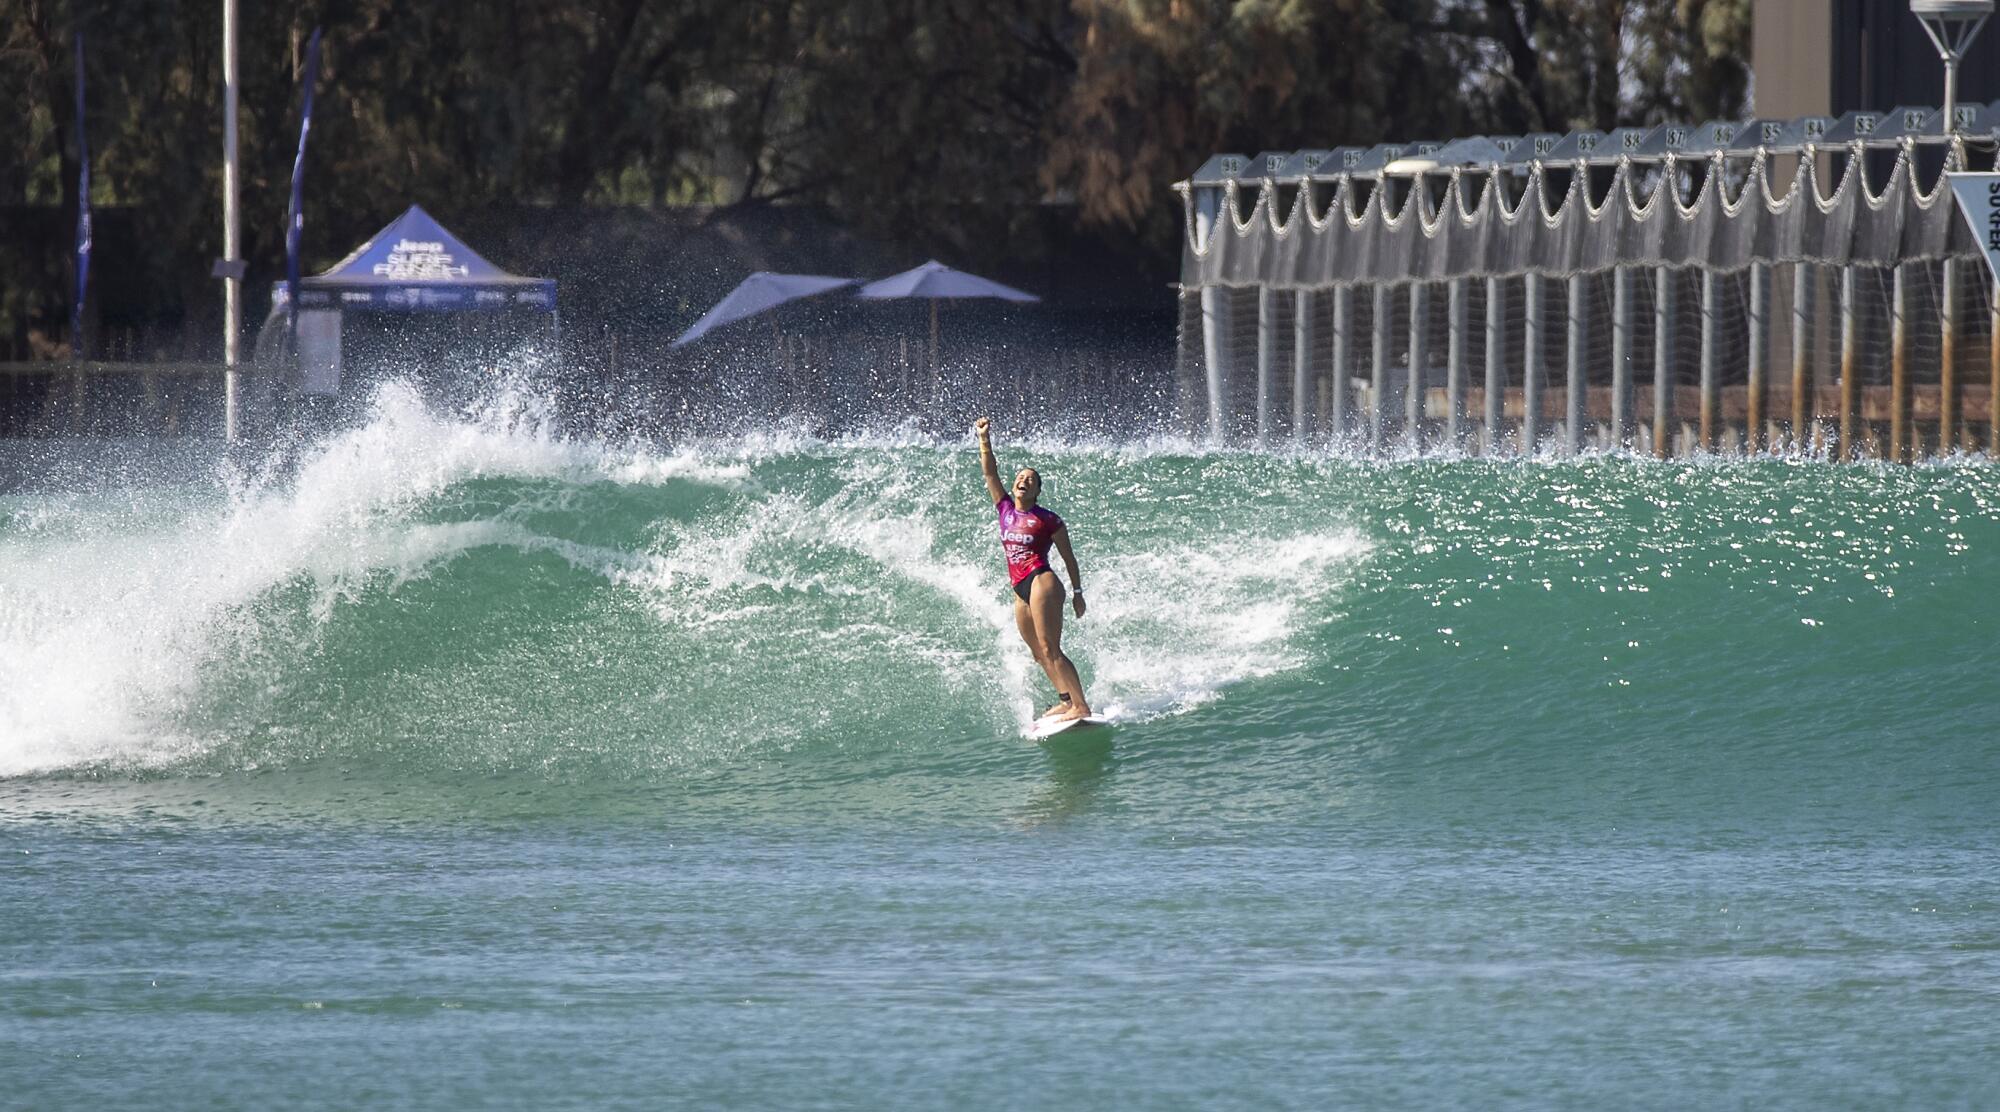 Johanne Defay, of France, celebrates defeating reigning Surf Ranch champion and four-time world champion Carissa Moore